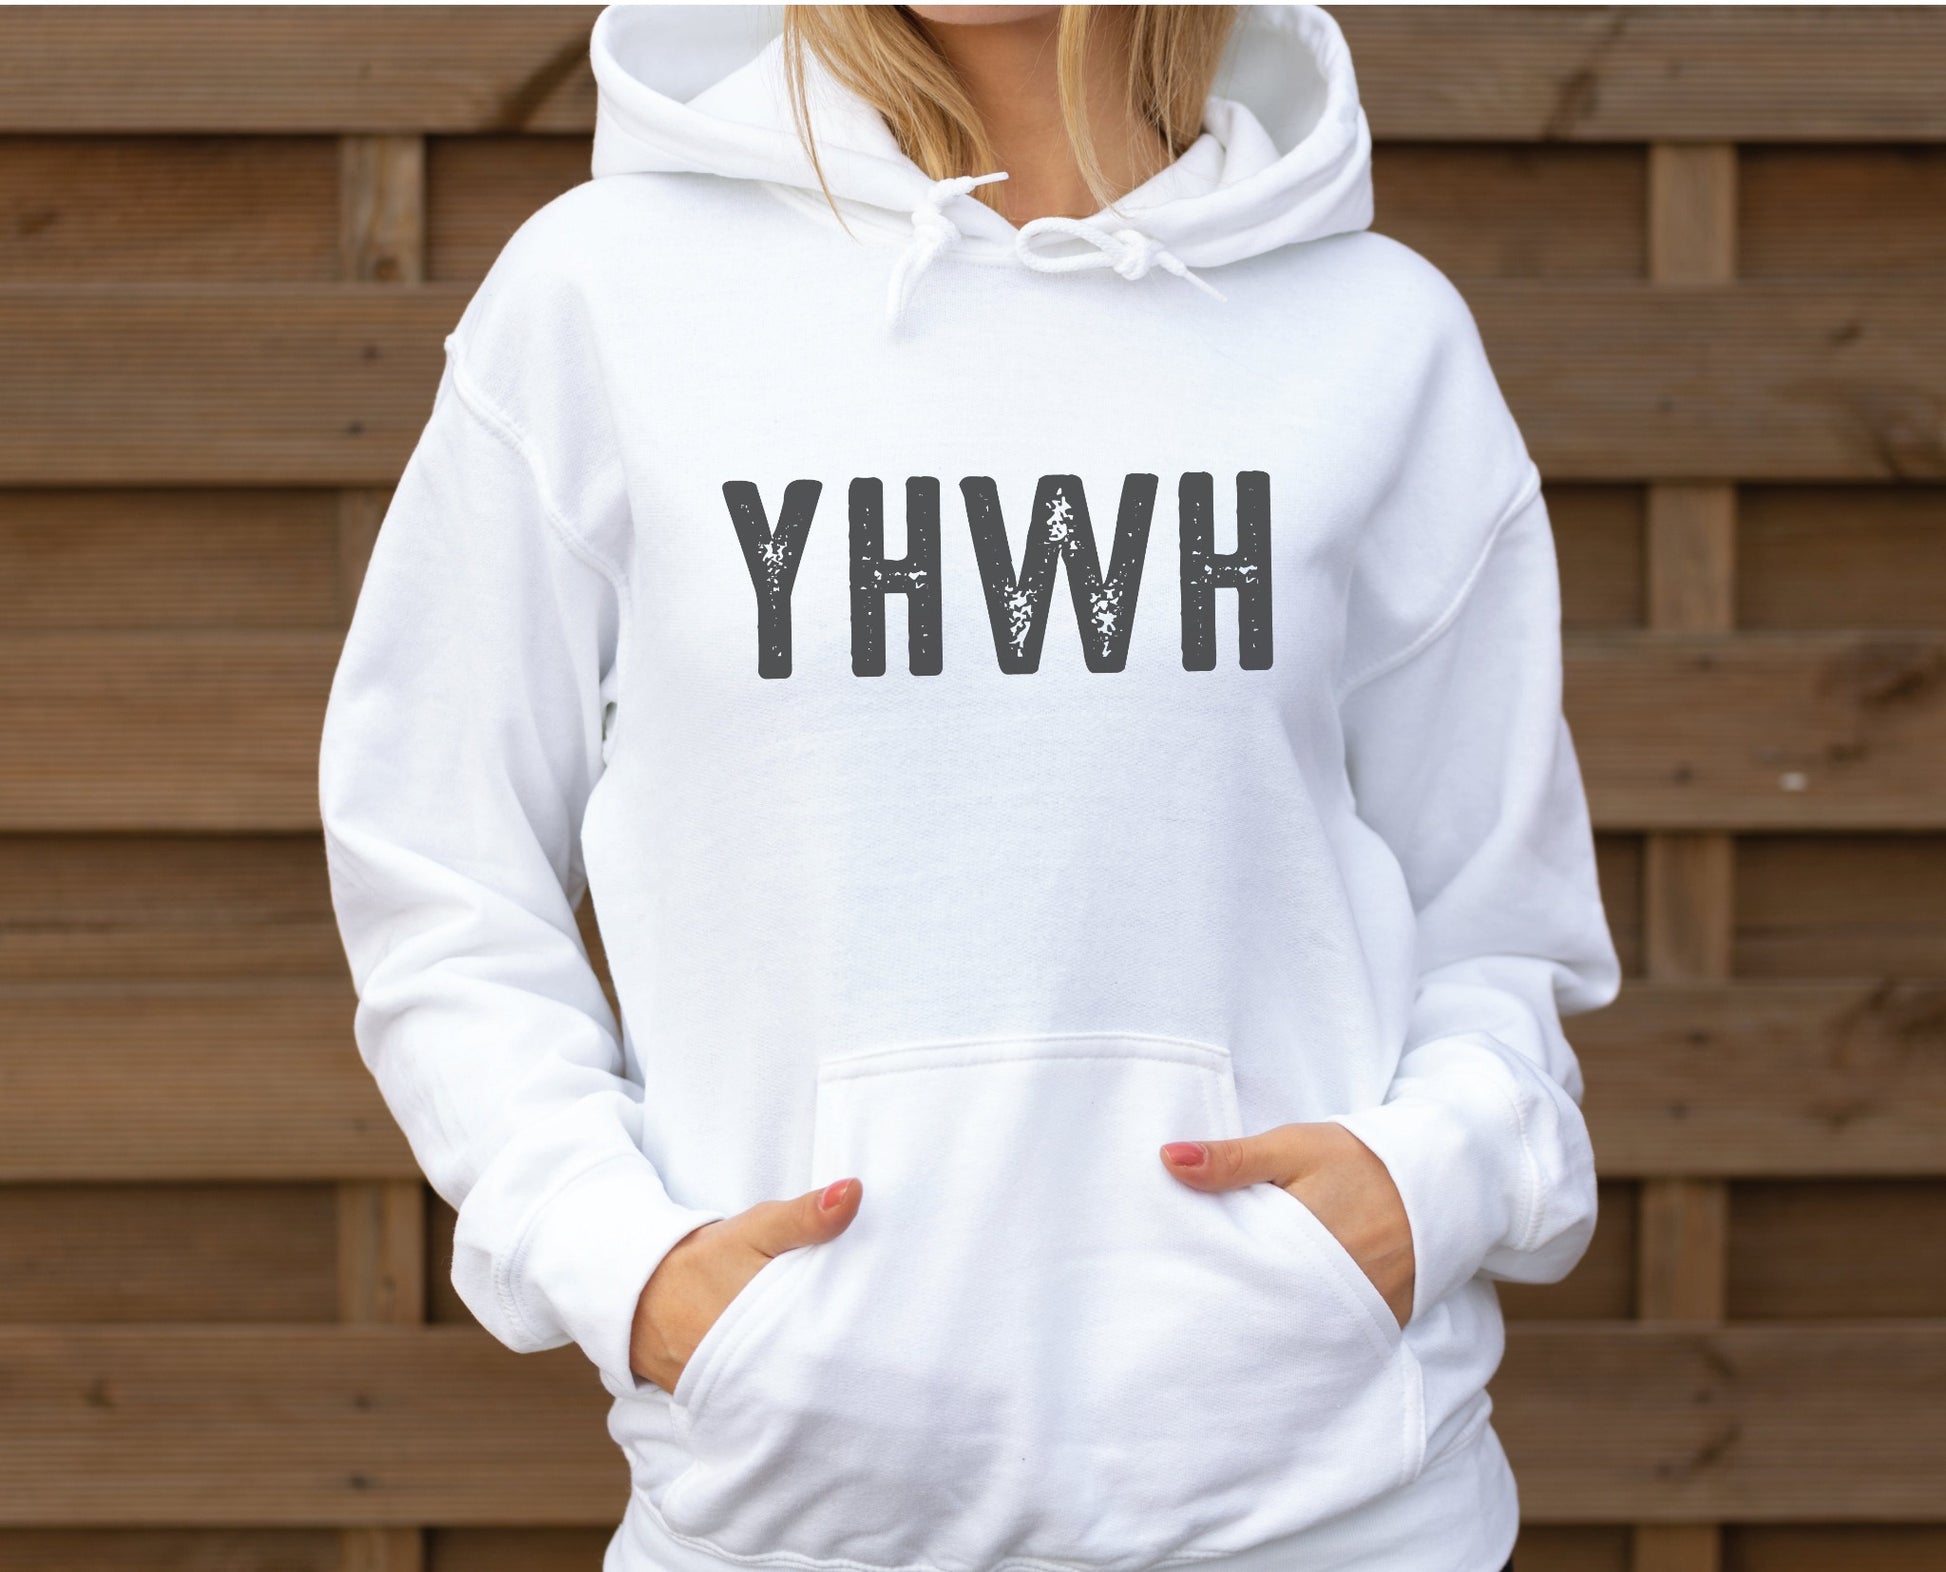 YHWH Hebrew Biblical Name of God Yahweh Christian aesthetic distressed design printed in charcoal gray on cozy white unisex hoodie sweatshirt for men and women